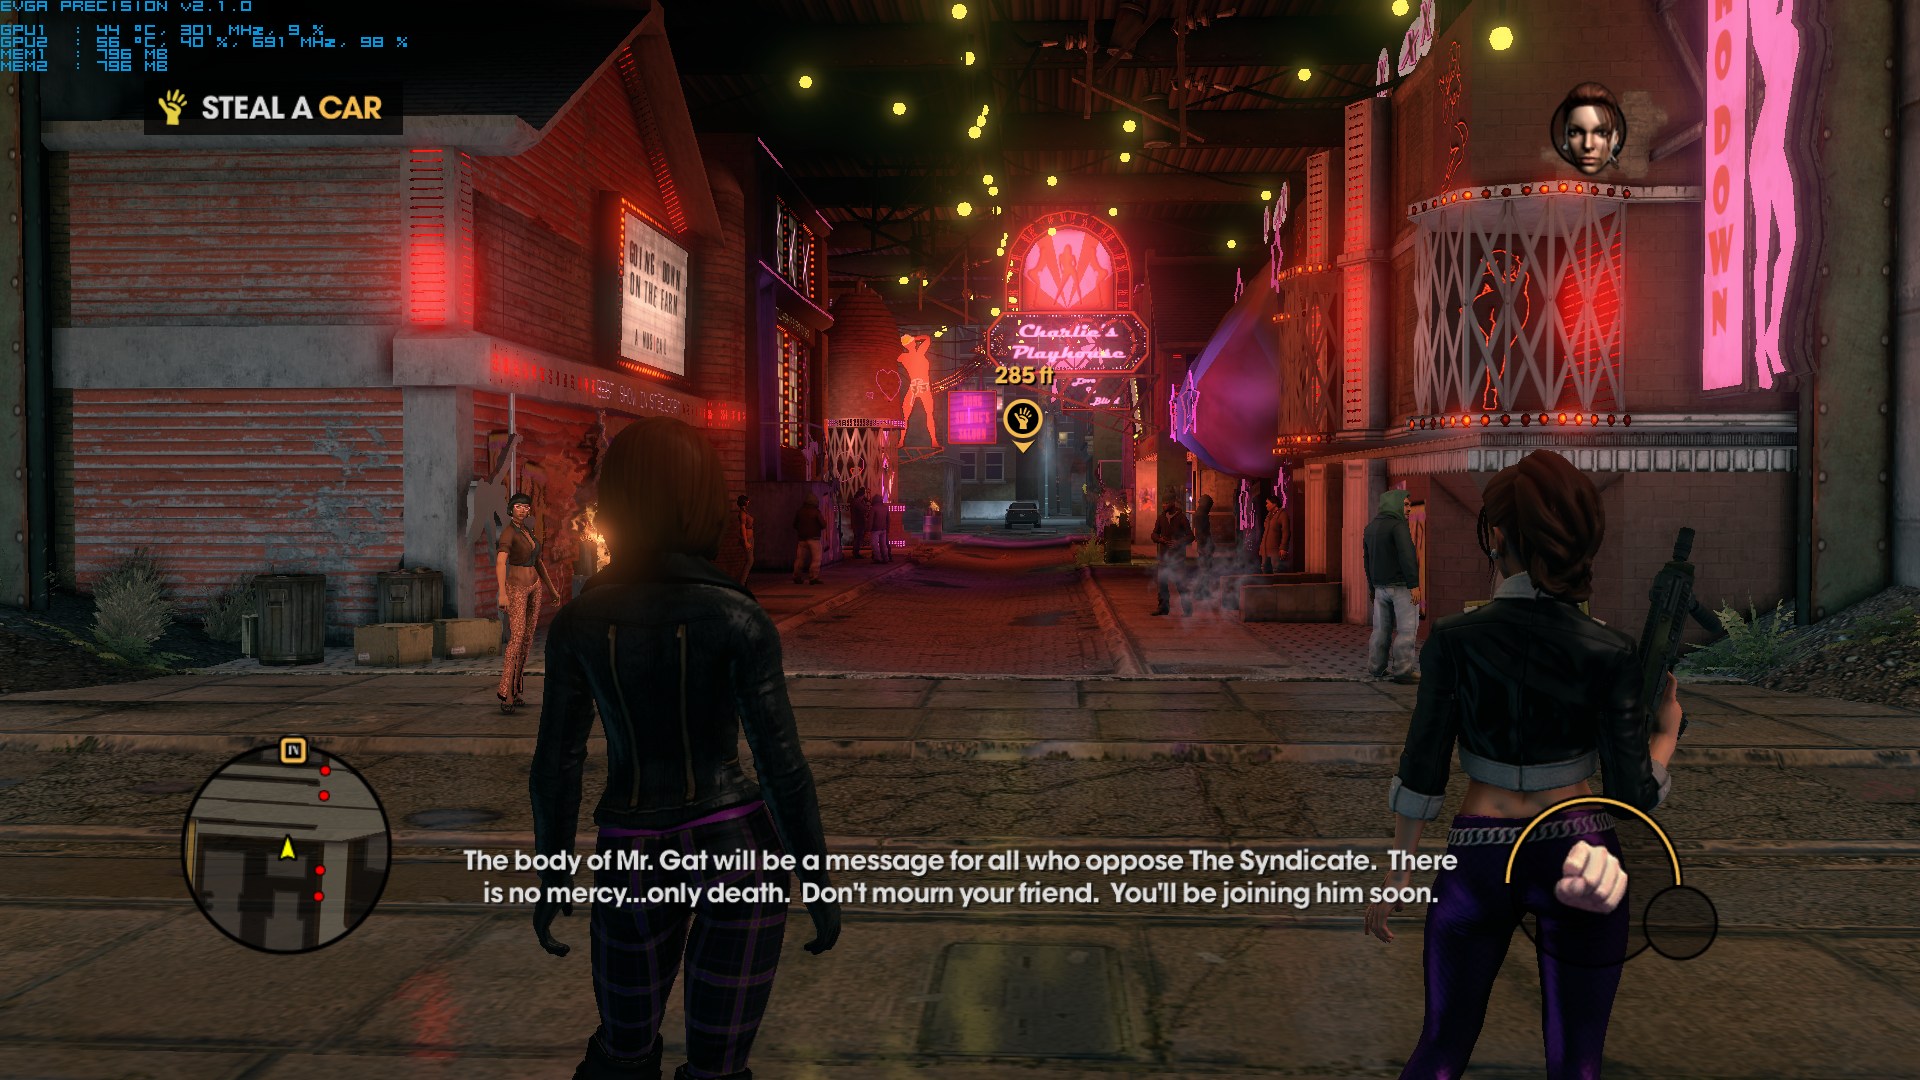 Saints Row The Third Remastered is a complete mess on the PC right